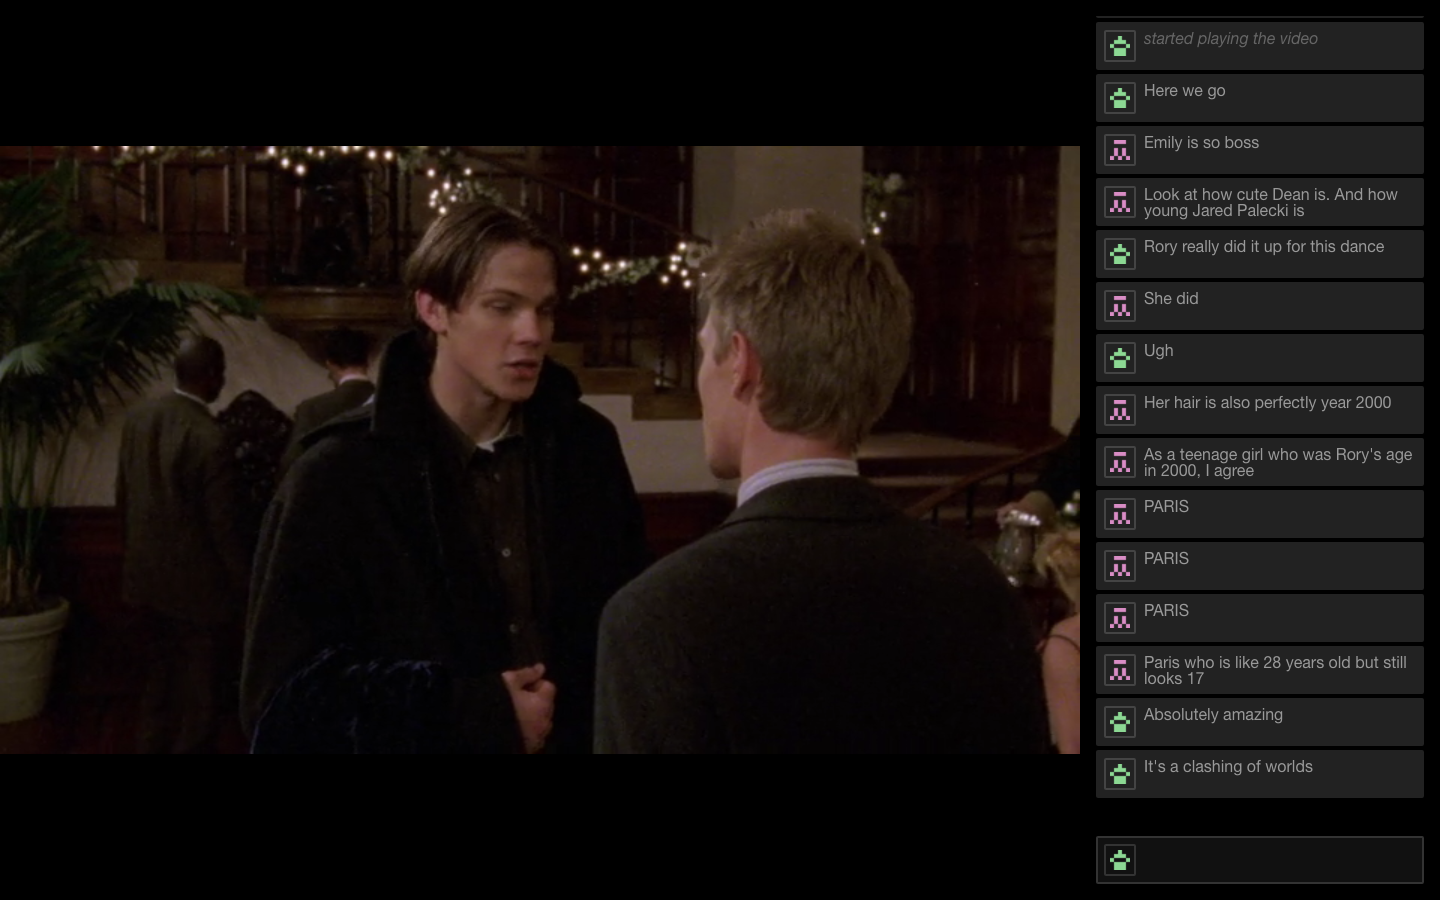 Screenshot of the previous Netflix Party extension design, showcasing the old layout, colors, and functionality before the redesign